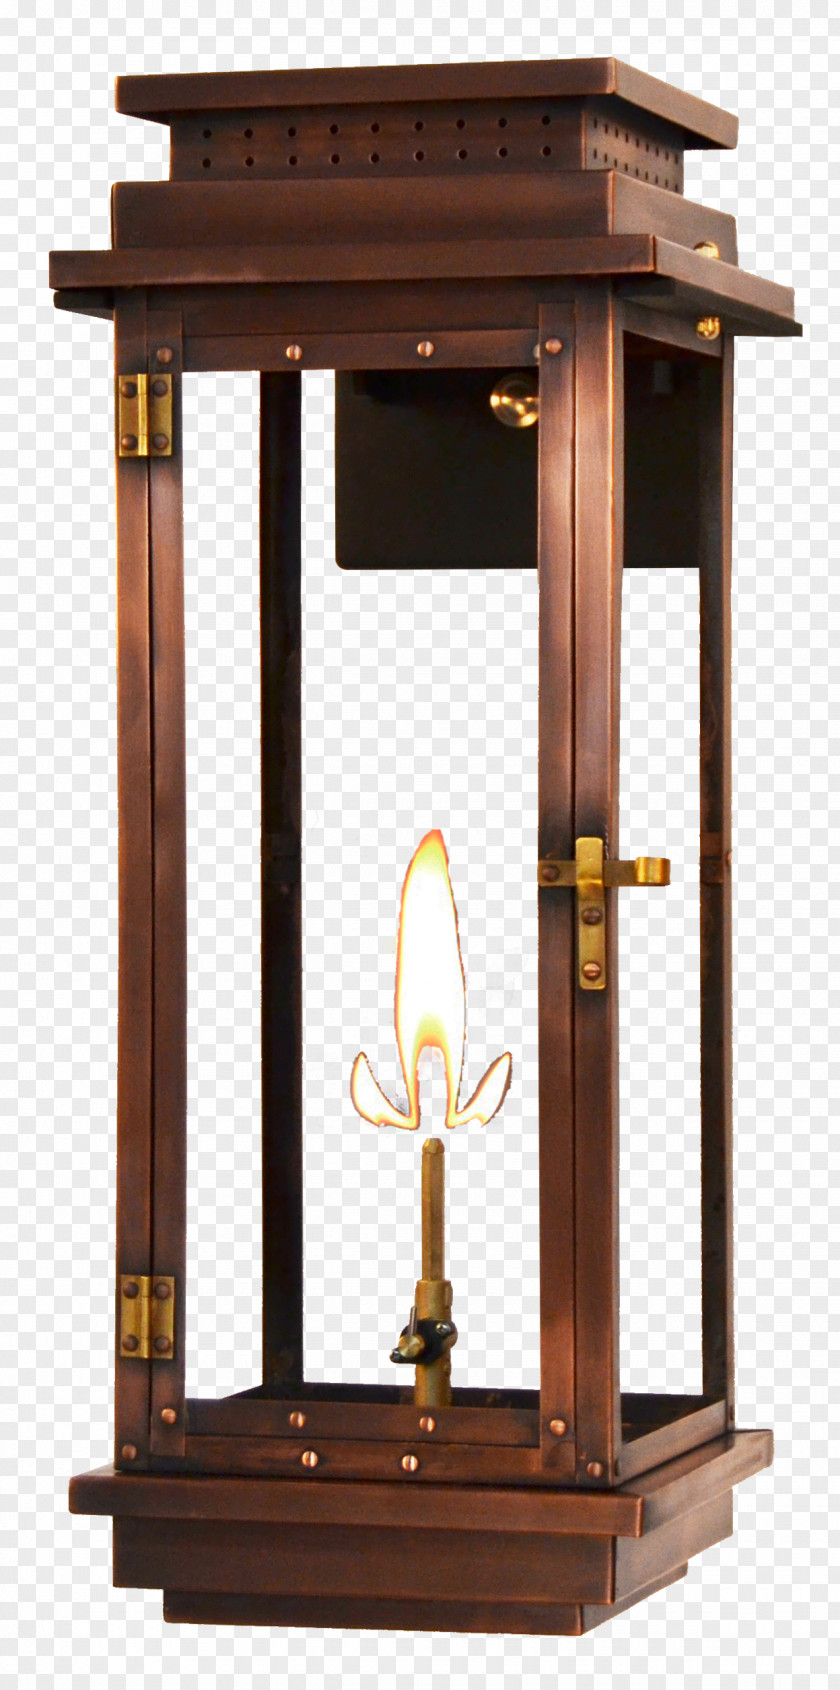 Gas Lighting Coppersmith Flame Electricity PNG